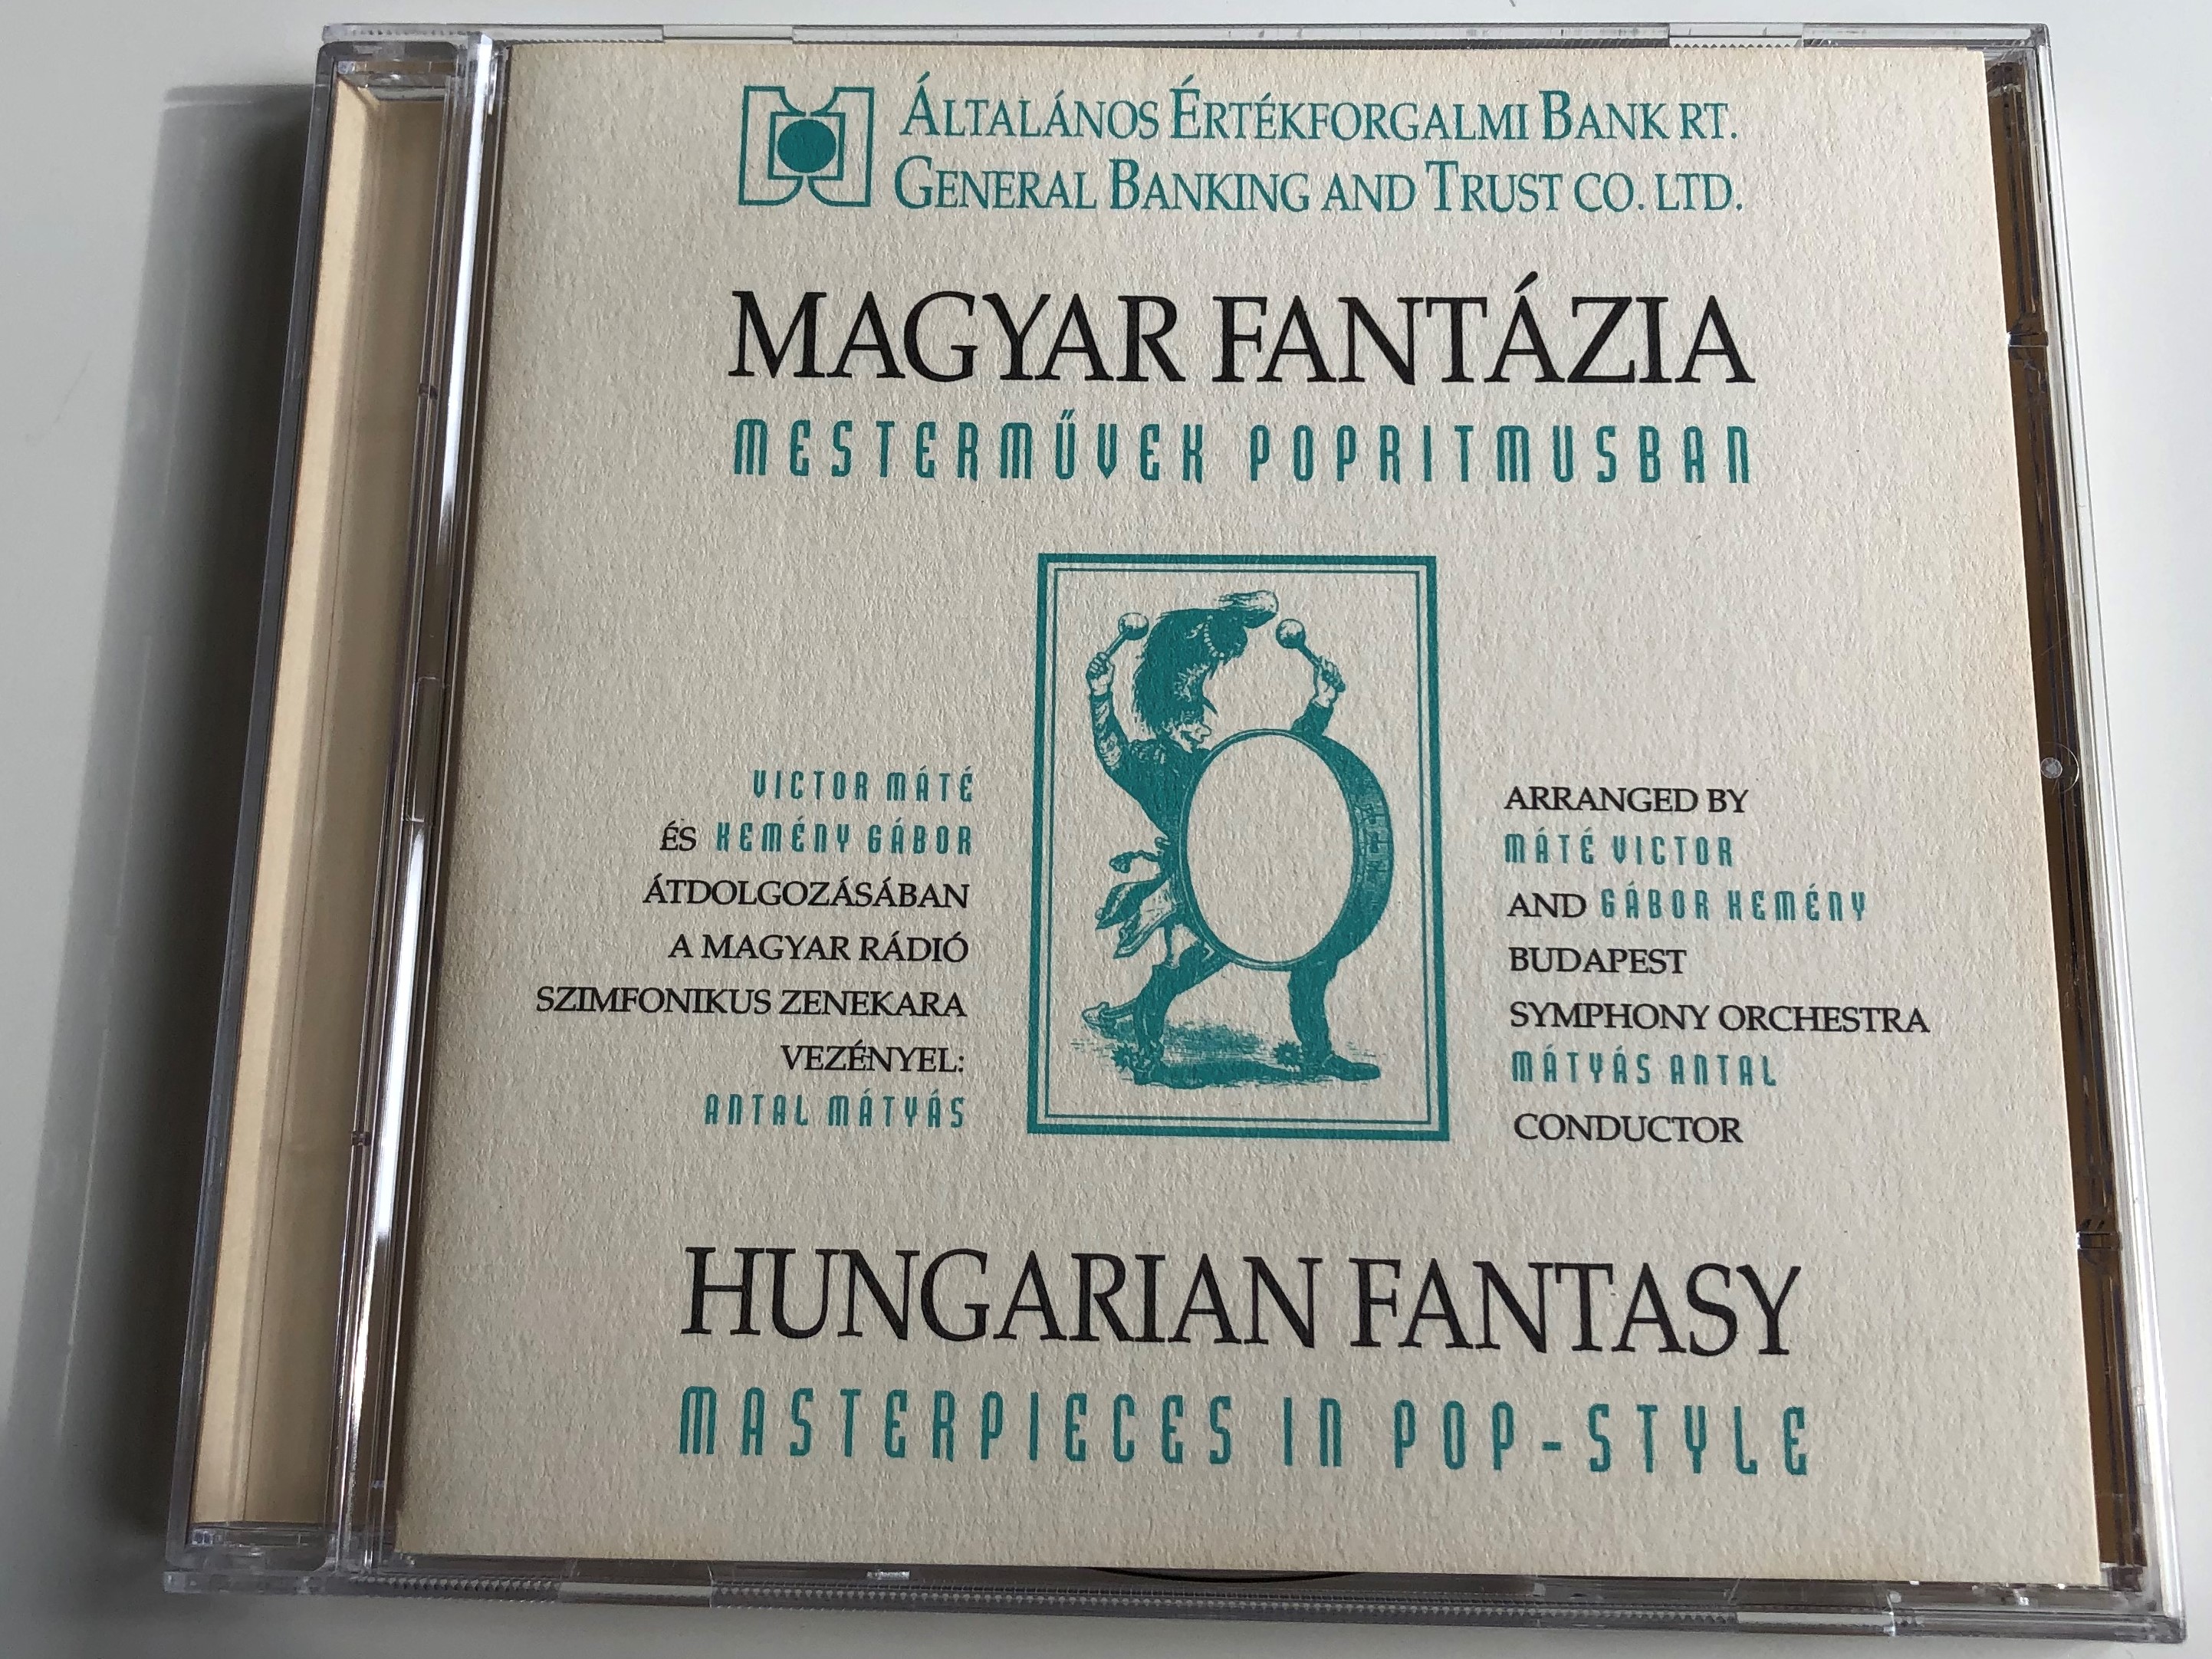 magyar-fantazia-mastermuvek-popritmusban-hungarian-fantasy-masterpieces-in-pop-style-arranged-mate-victor-and-gabor-kemeny-budapest-symphony-orchestra-conducted-matyas-antal-triola-ltd-a-1-.jpg